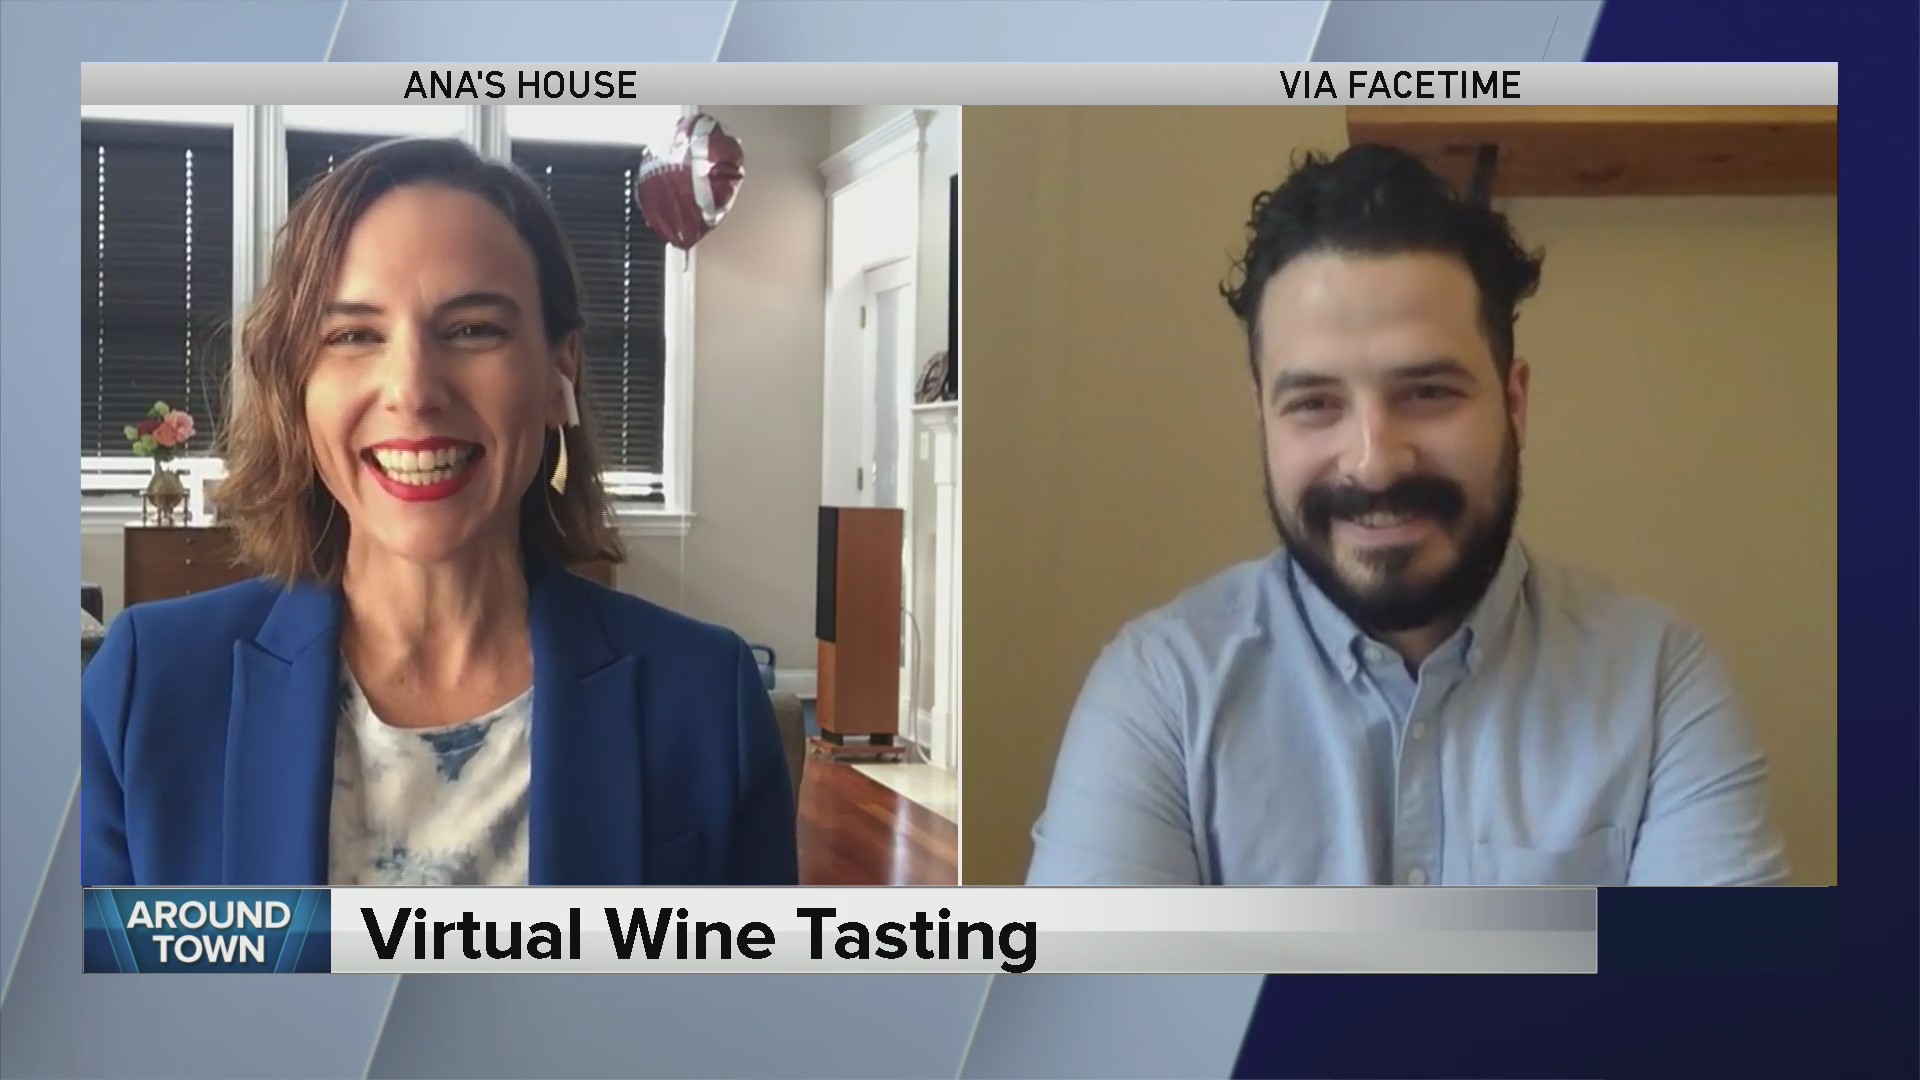 Around ‘The House’ has some fun with virtual wine tasting and vinyl records